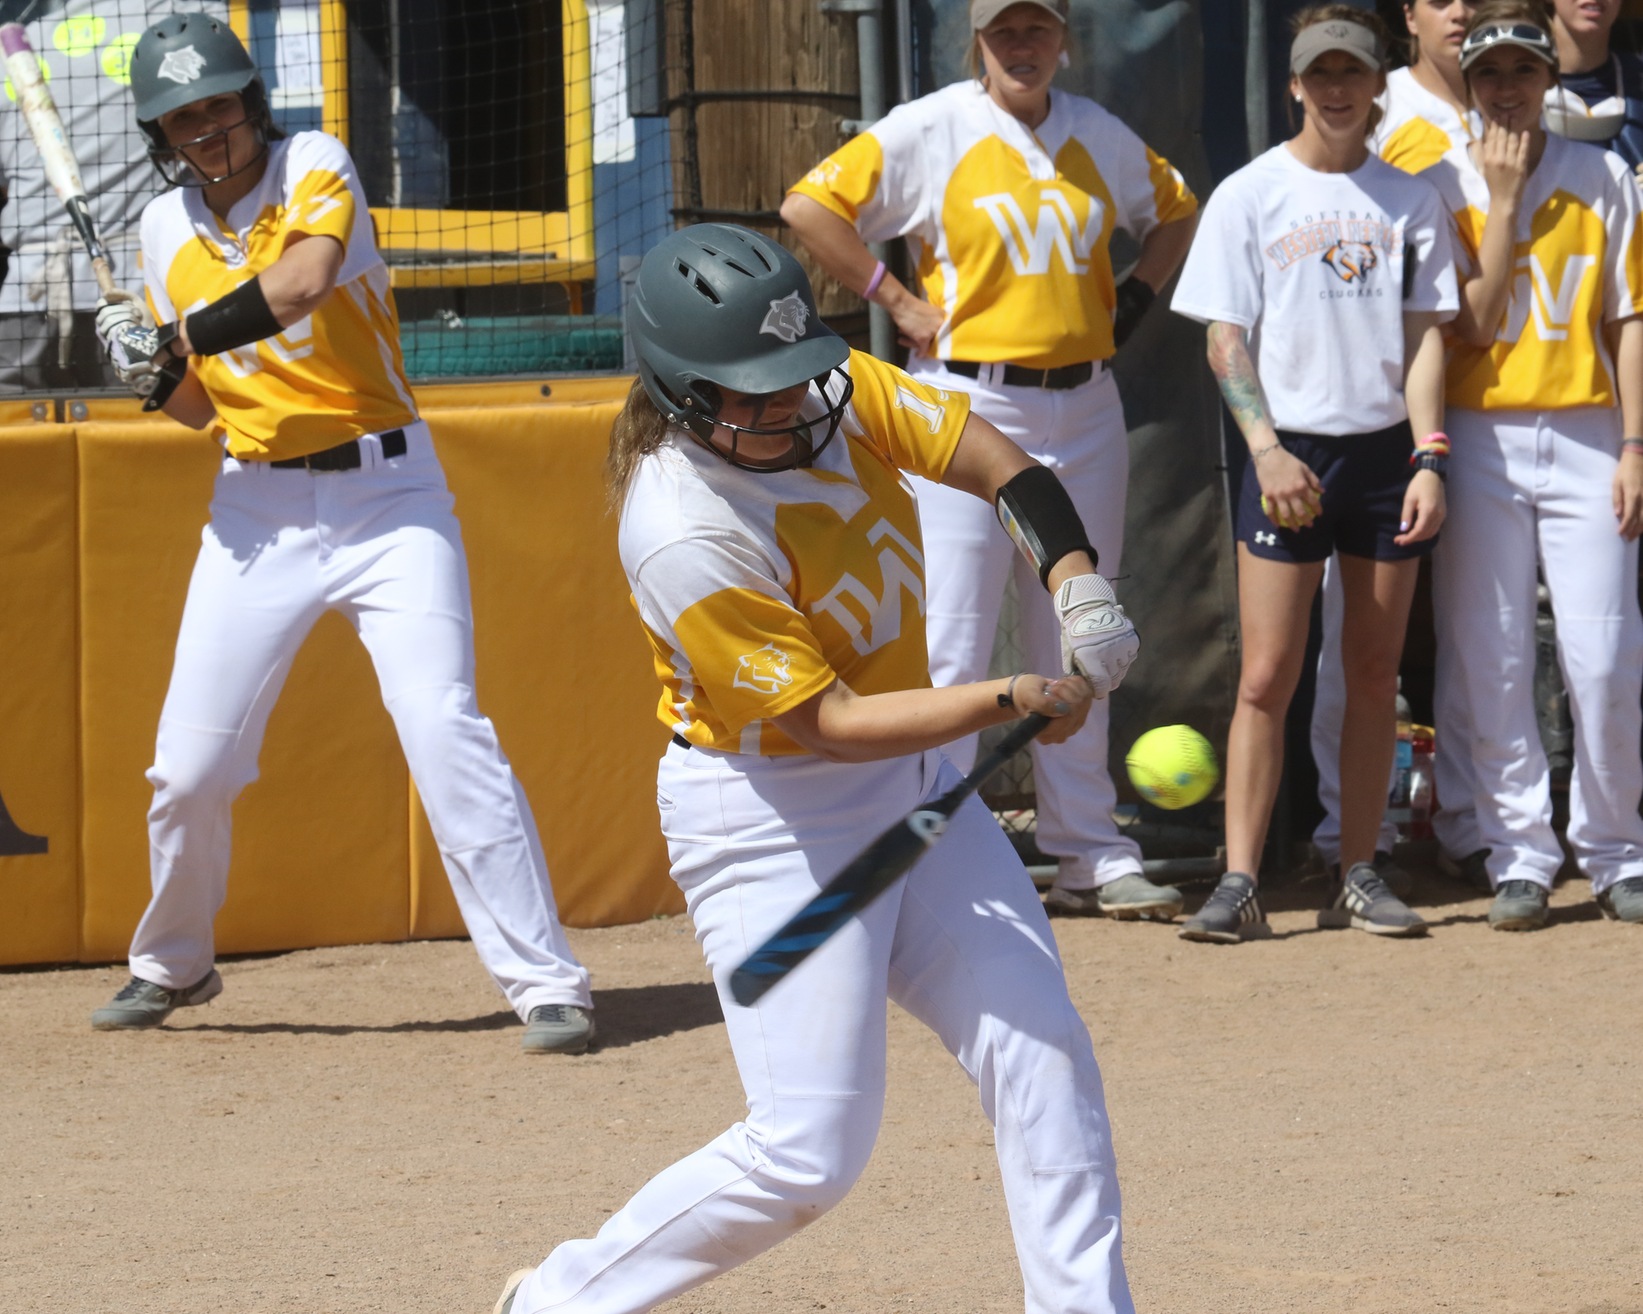 WNCC softball wins 7th straight with sweep over McCook